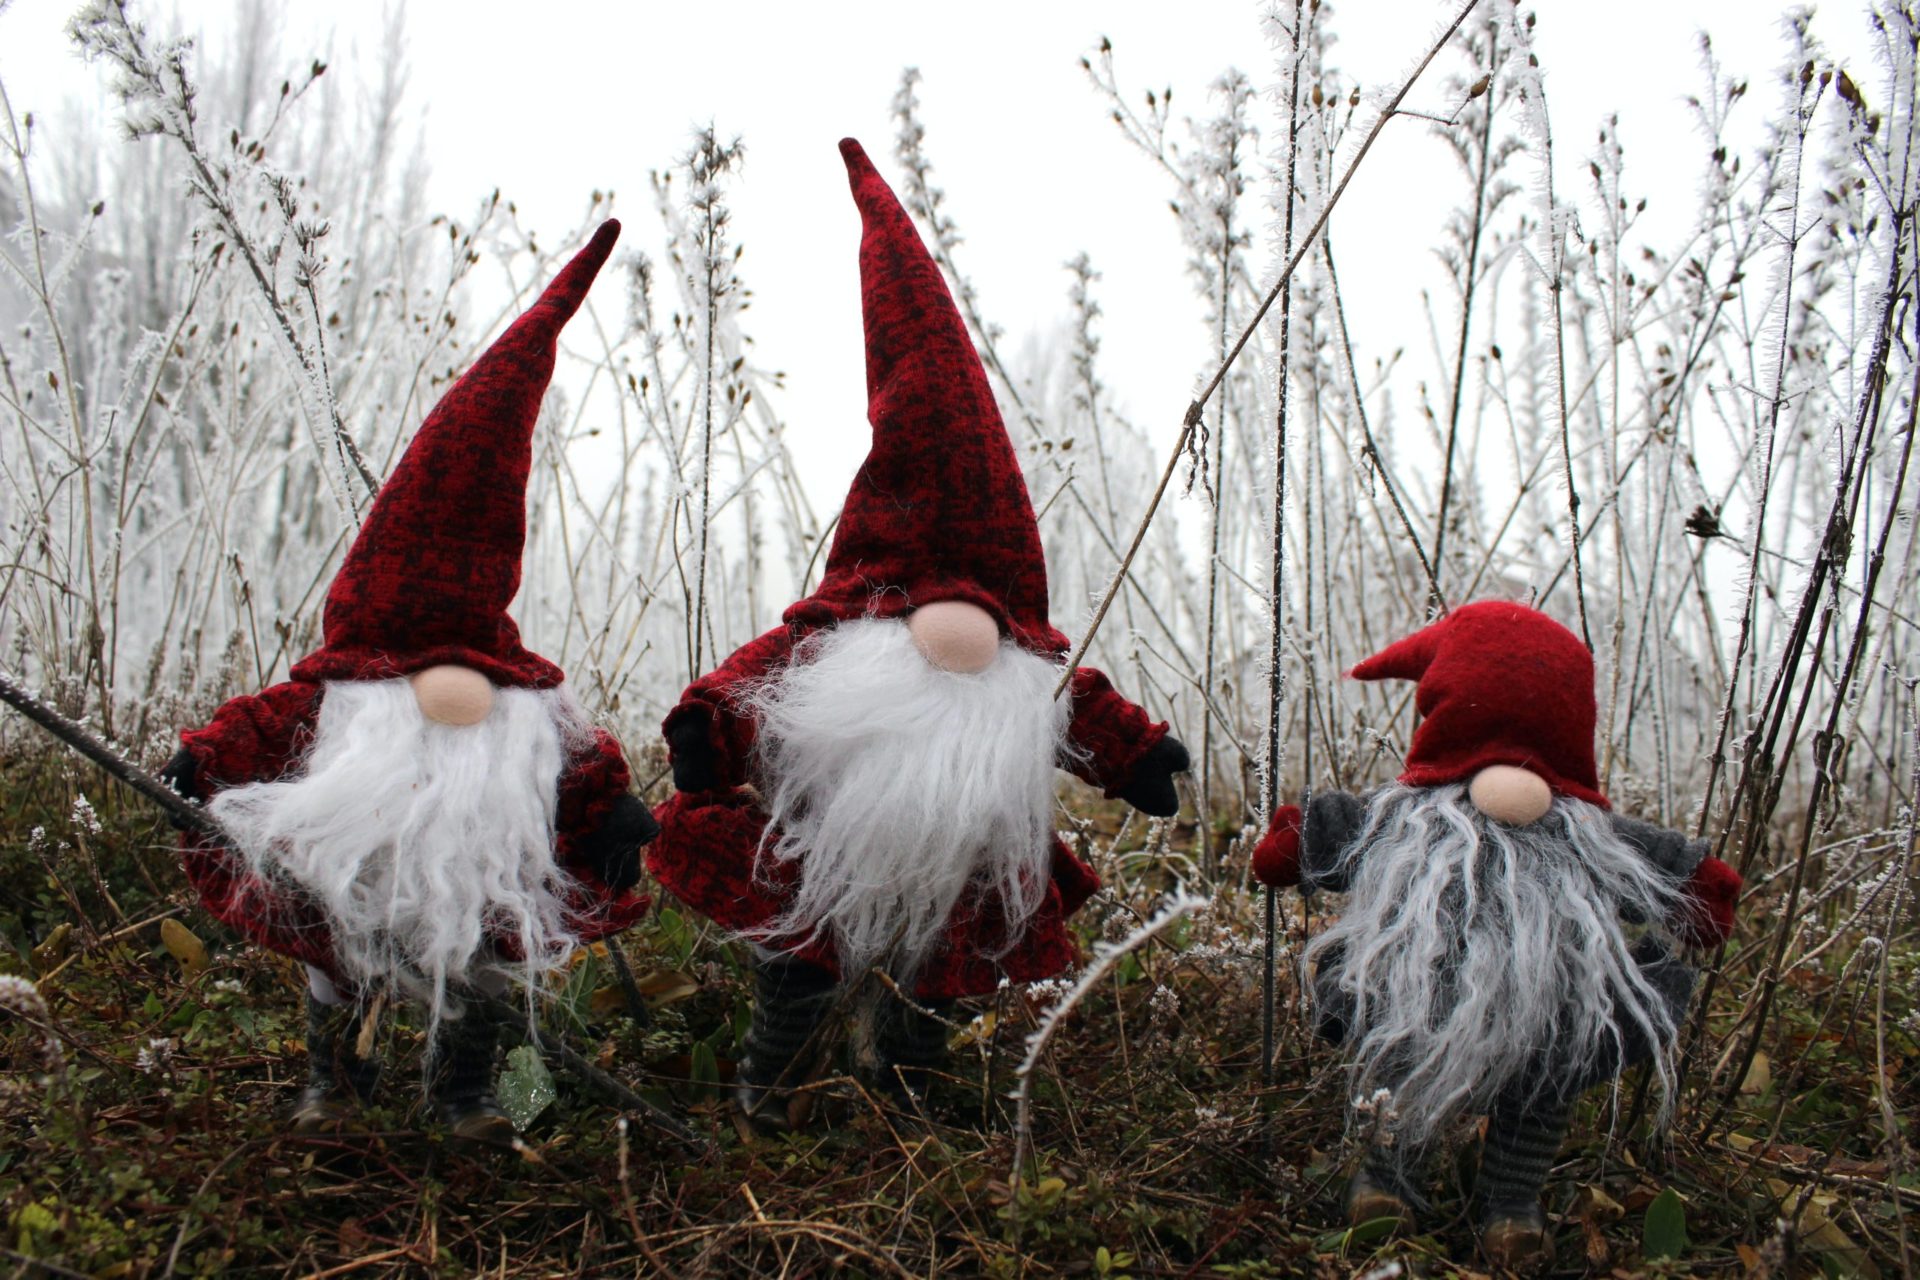 Three crafted gnomes with tall red hats and white and gray beards rest among a frosted field.